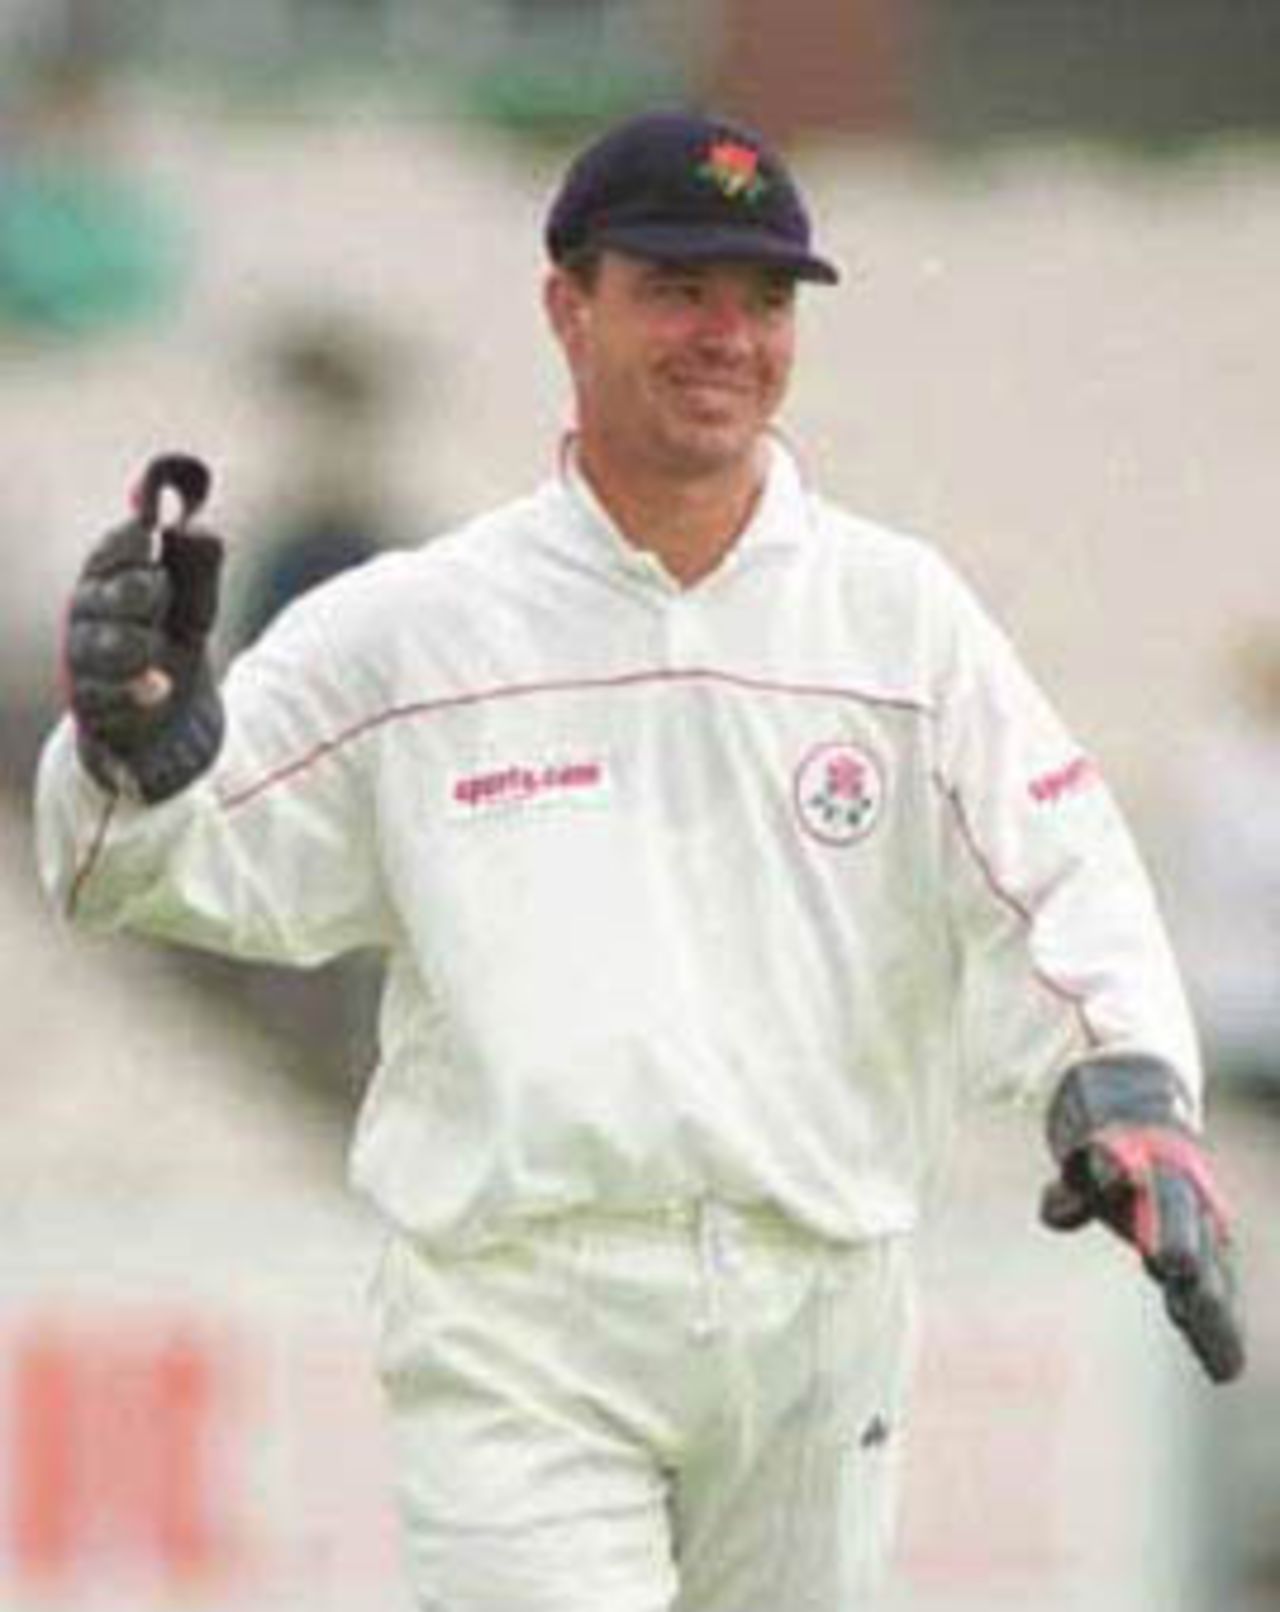 Warren Hegg the Lancashire record holder for catches, PPP healthcare County Championship Division One, 2000, Lancashire v Somerset, Old Trafford, Manchester, 08-10 September 2000 (Day 3).